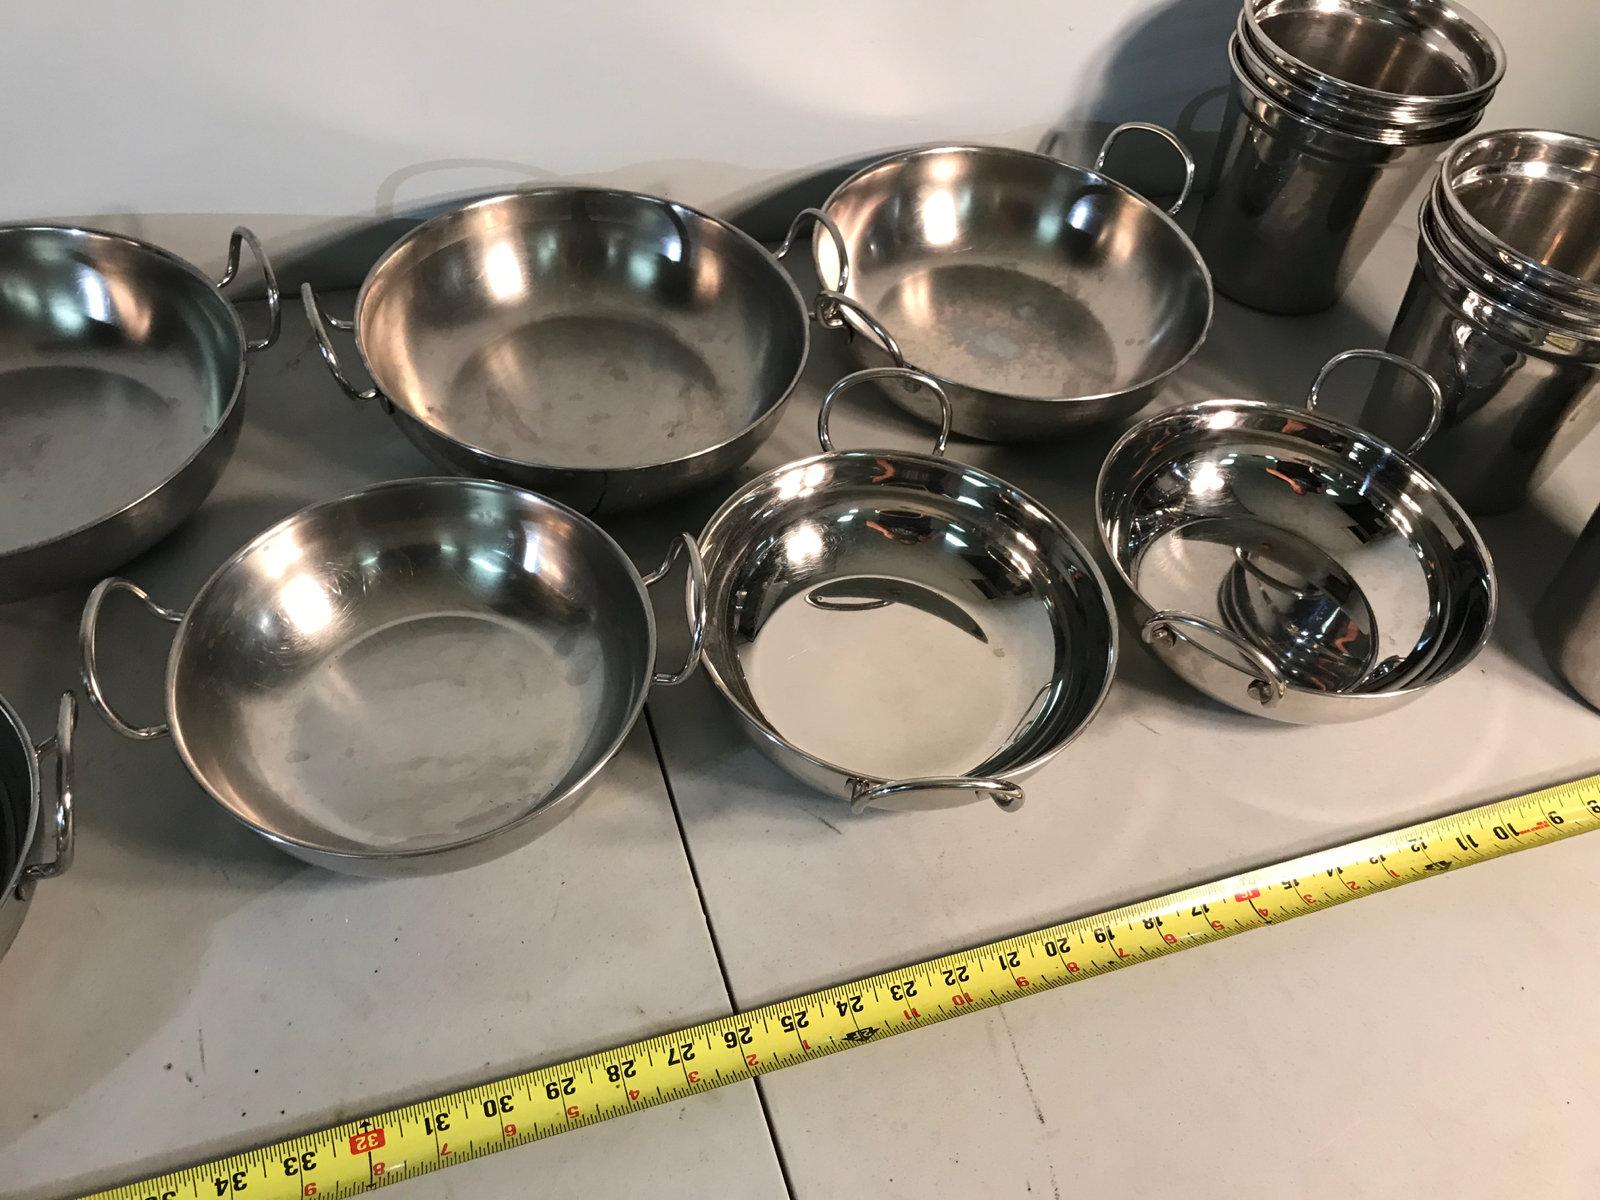 Assorted stainless  steel bowls and serving dishes